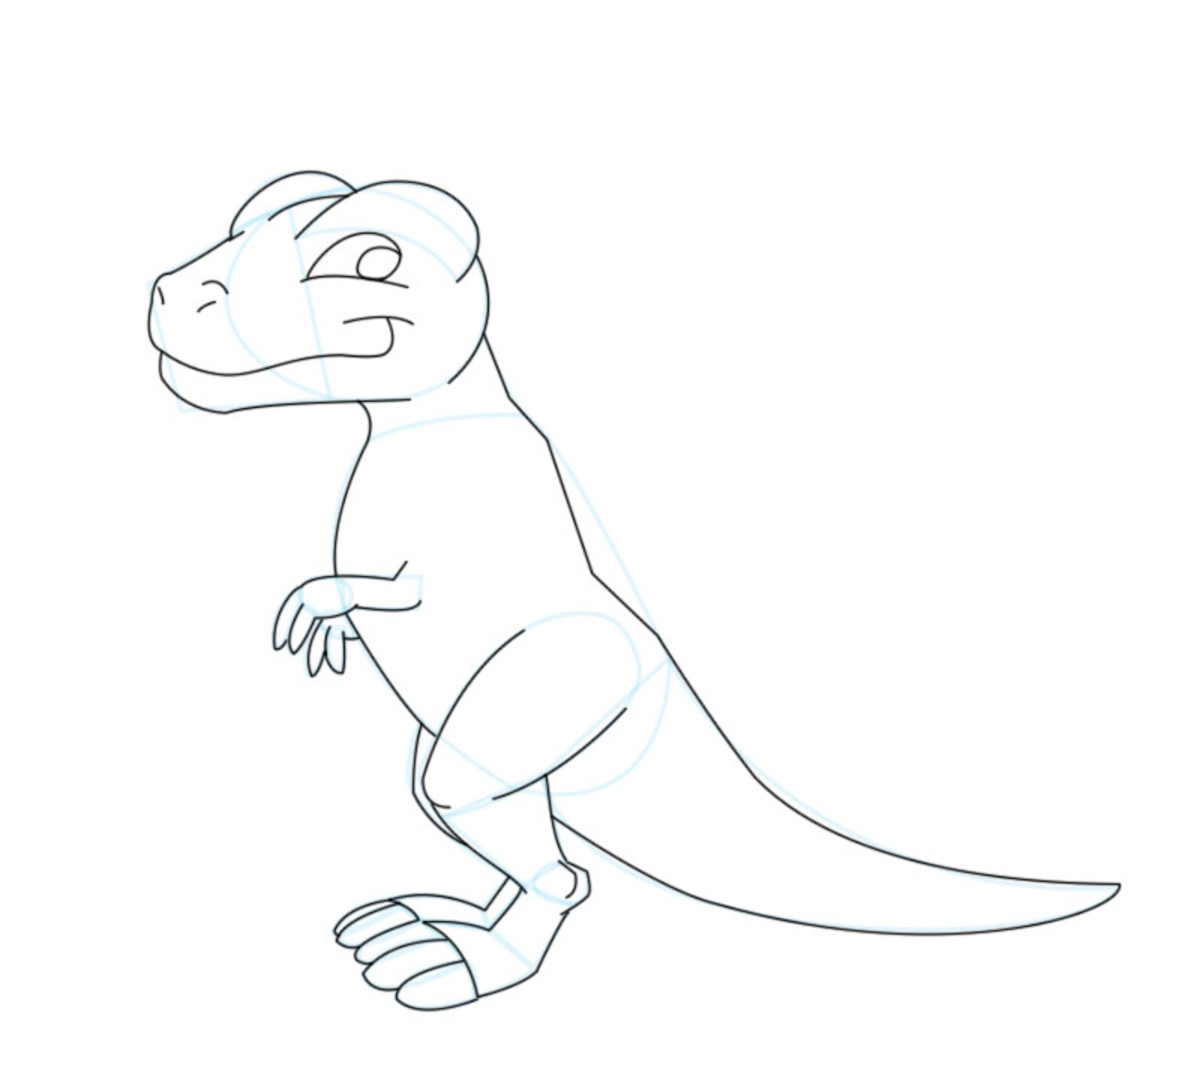 Go over your shapes, giving your dinosaur form. Add the features (you may do this before or after cleaning up your sketch lines).